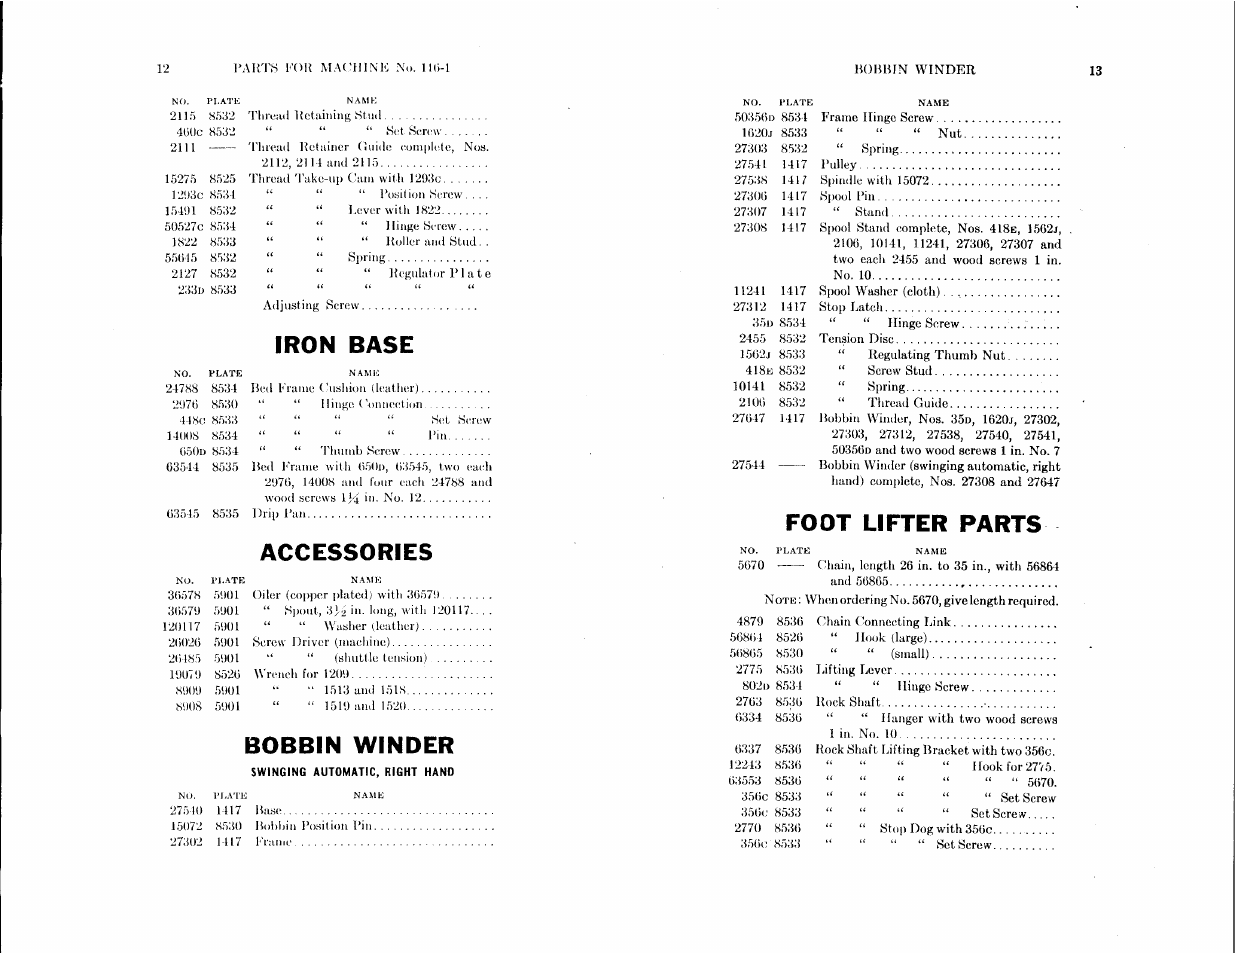 Iron base, Accessories, Bobbin winder | Foot lifter parts | SINGER 116-1 User Manual | Page 6 / 20